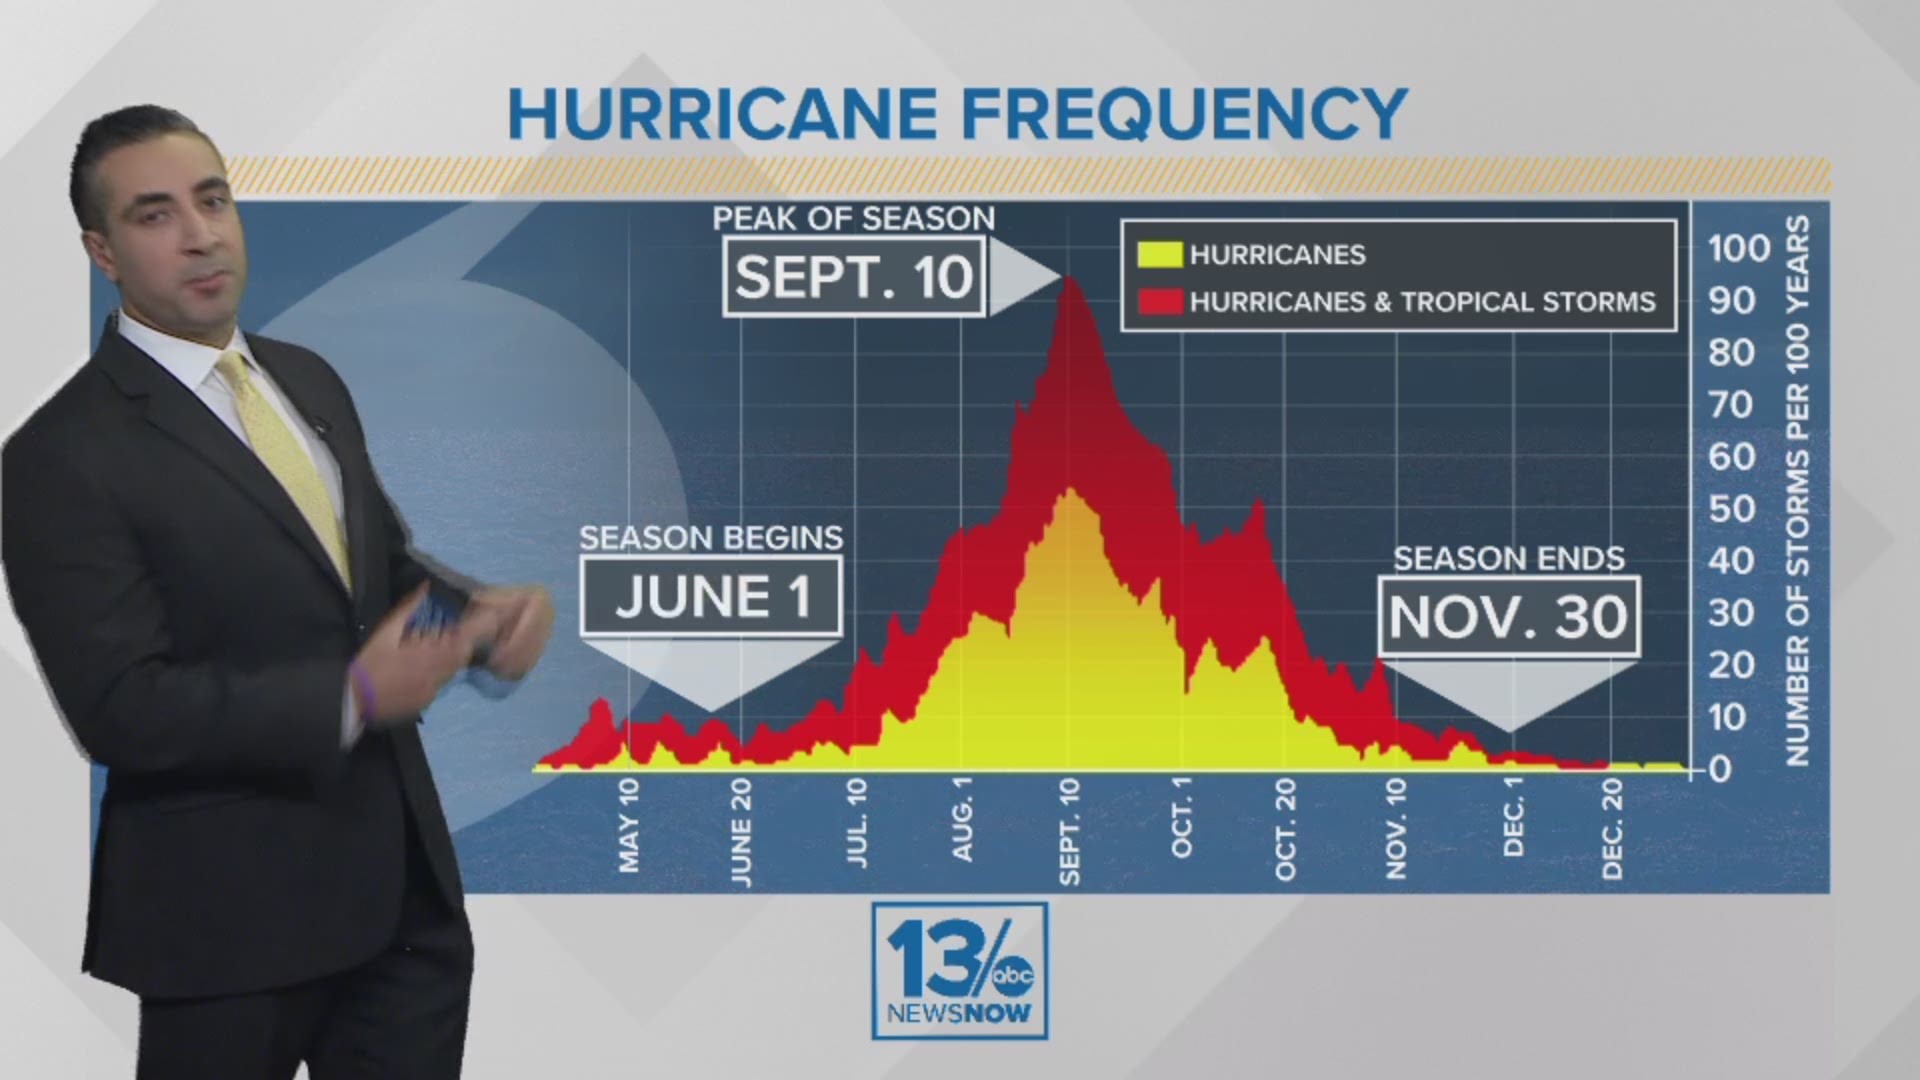 13News Now meteorologist Tim Pandajis gives an update on how the hurricane season is shaping up in both the Atlantic and Pacific basins.